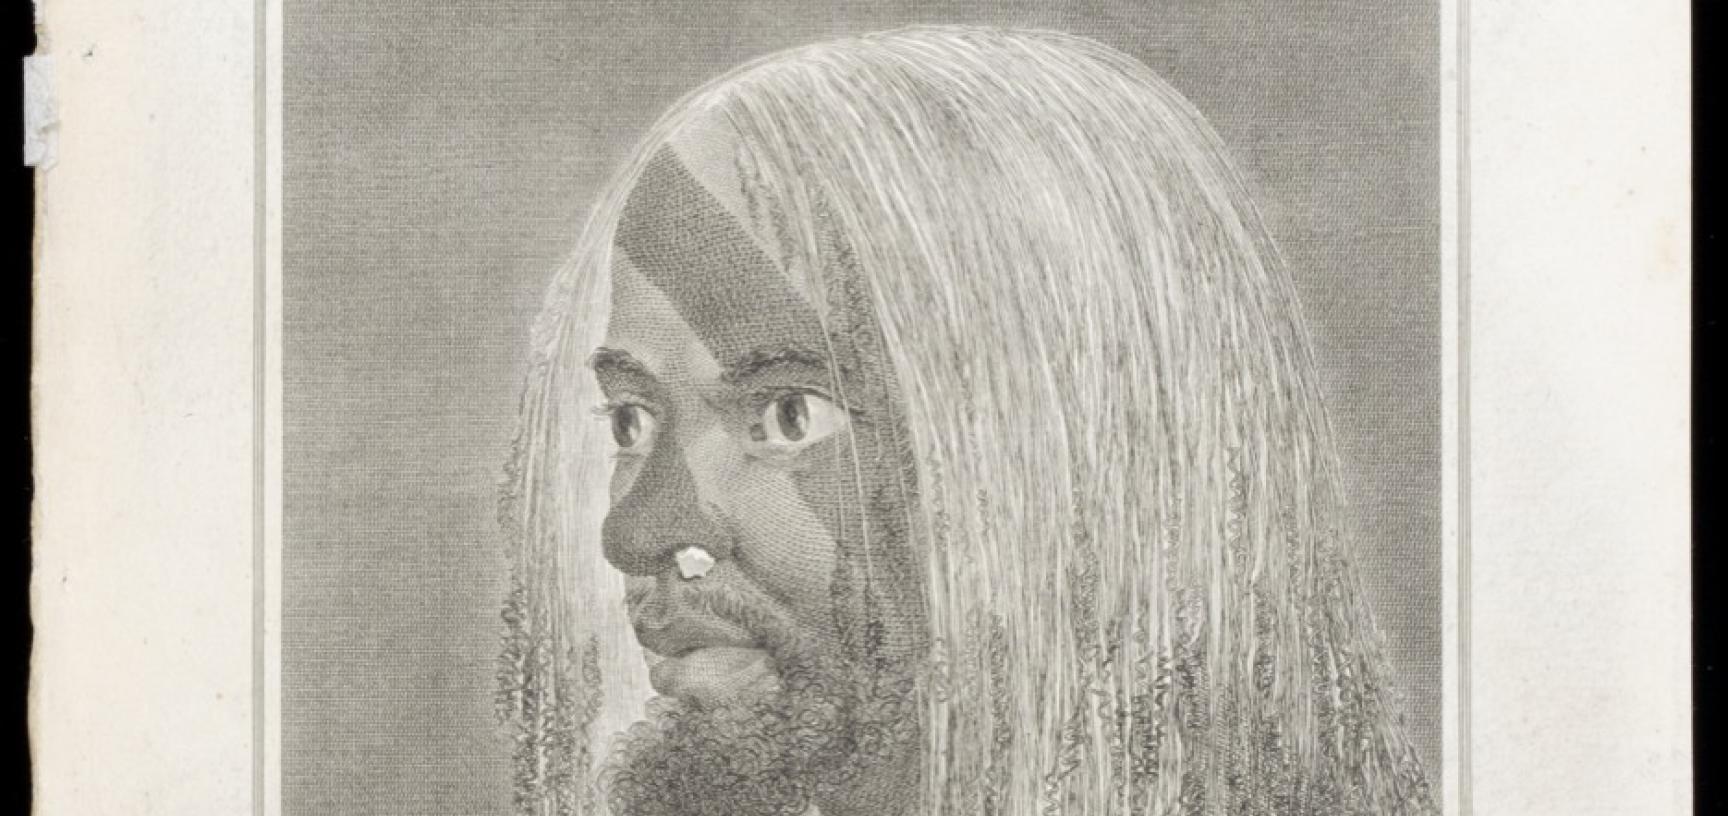 Man of Vanuatu (name unknown), engraved for publication by James Basire after an original drawing by William Hodges. (Copyright Pitt Rivers Museum, University of Oxford. Accession Number: 2013.28.131)